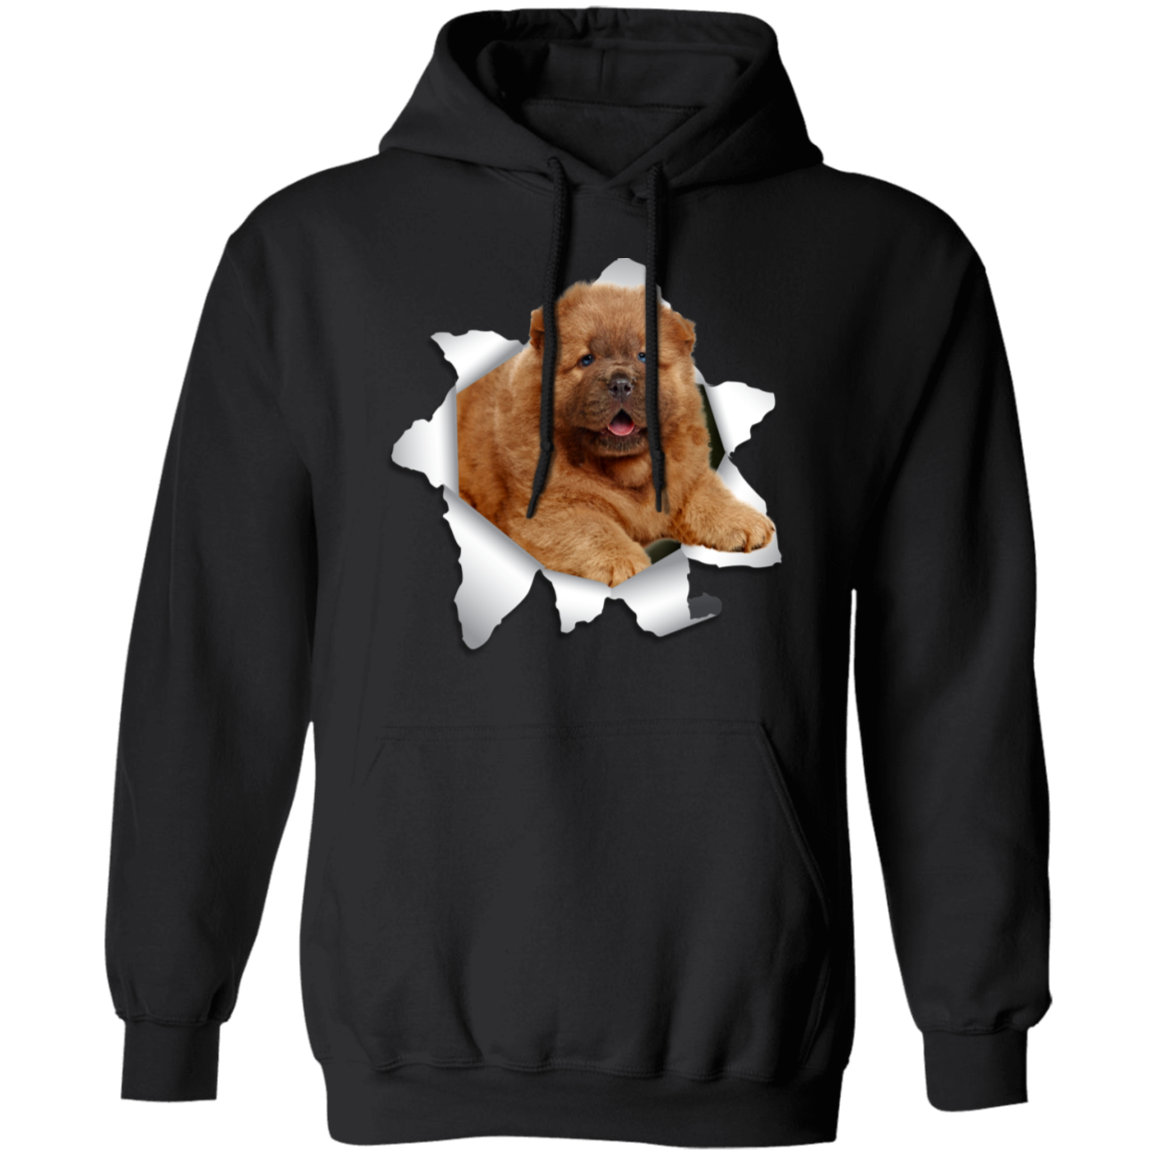 Canine's World Sweatshirts CHOW CHOW 3D Pullover Hoodie 8 oz. Ultimate Shield